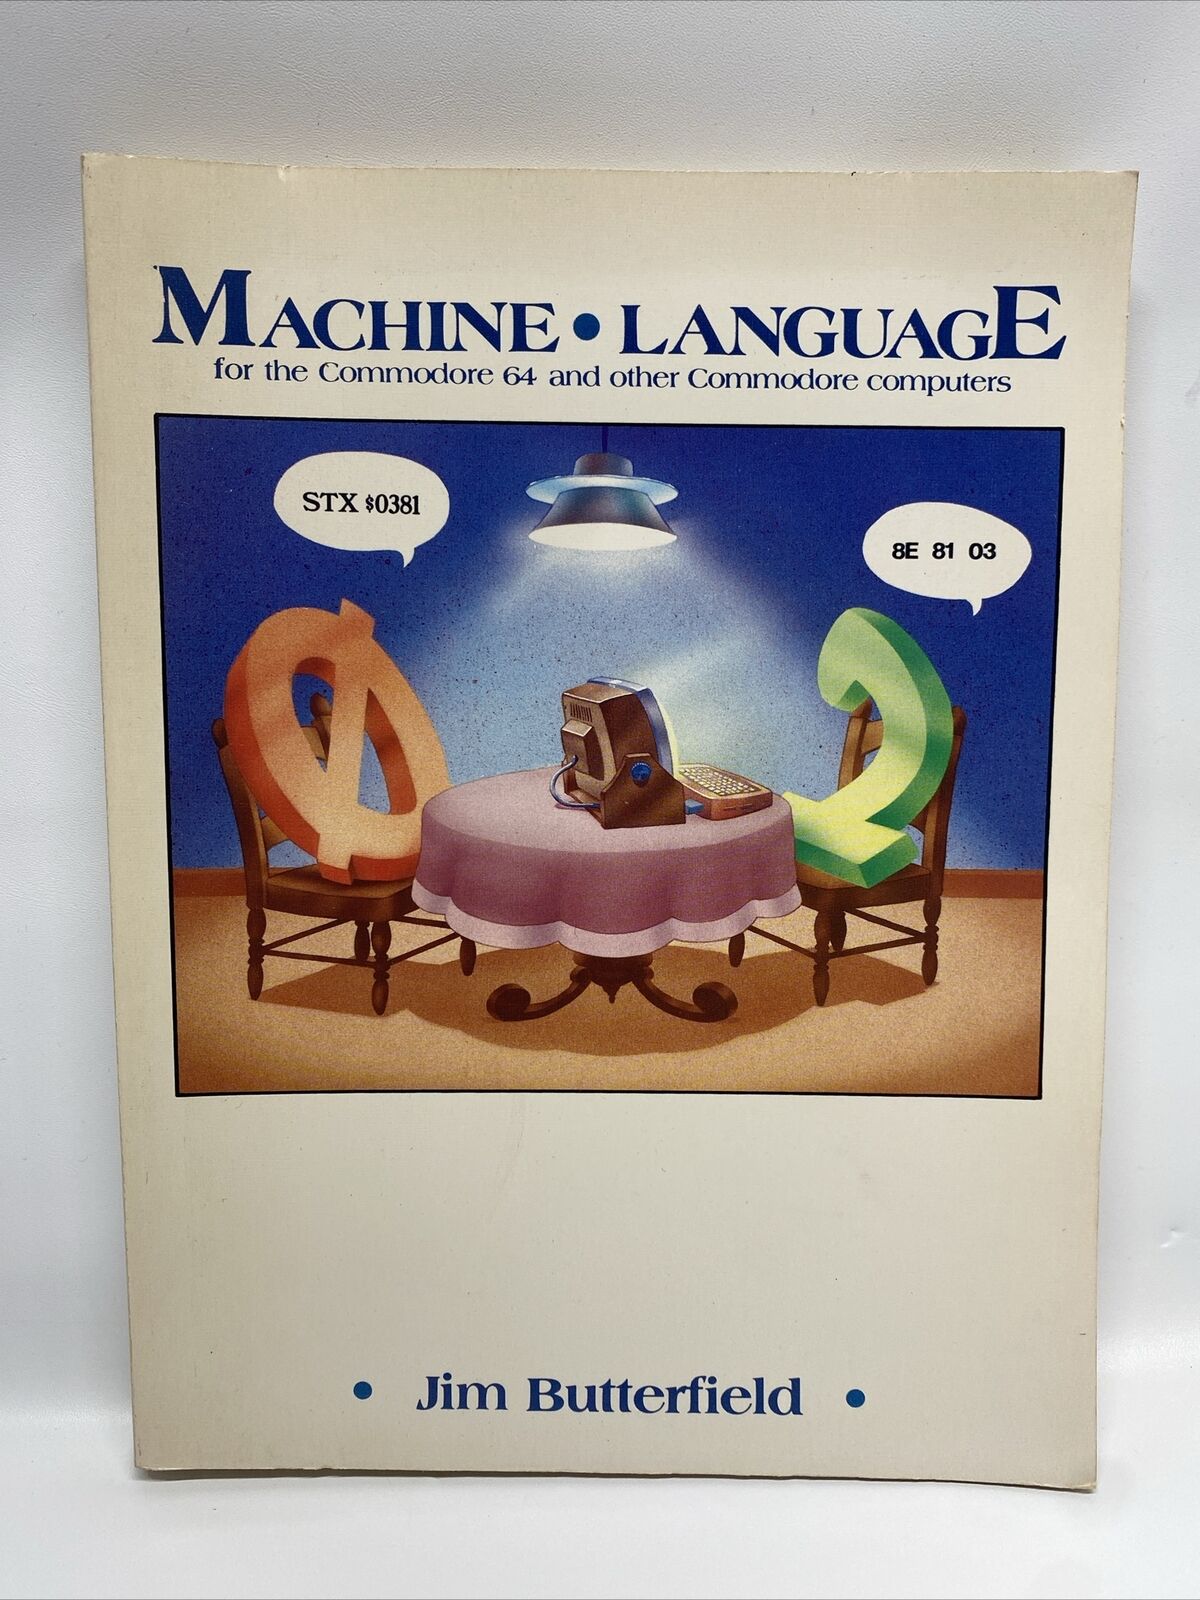 Machine Language for Commodore 64 and other Commodore computers Jim Butterfield